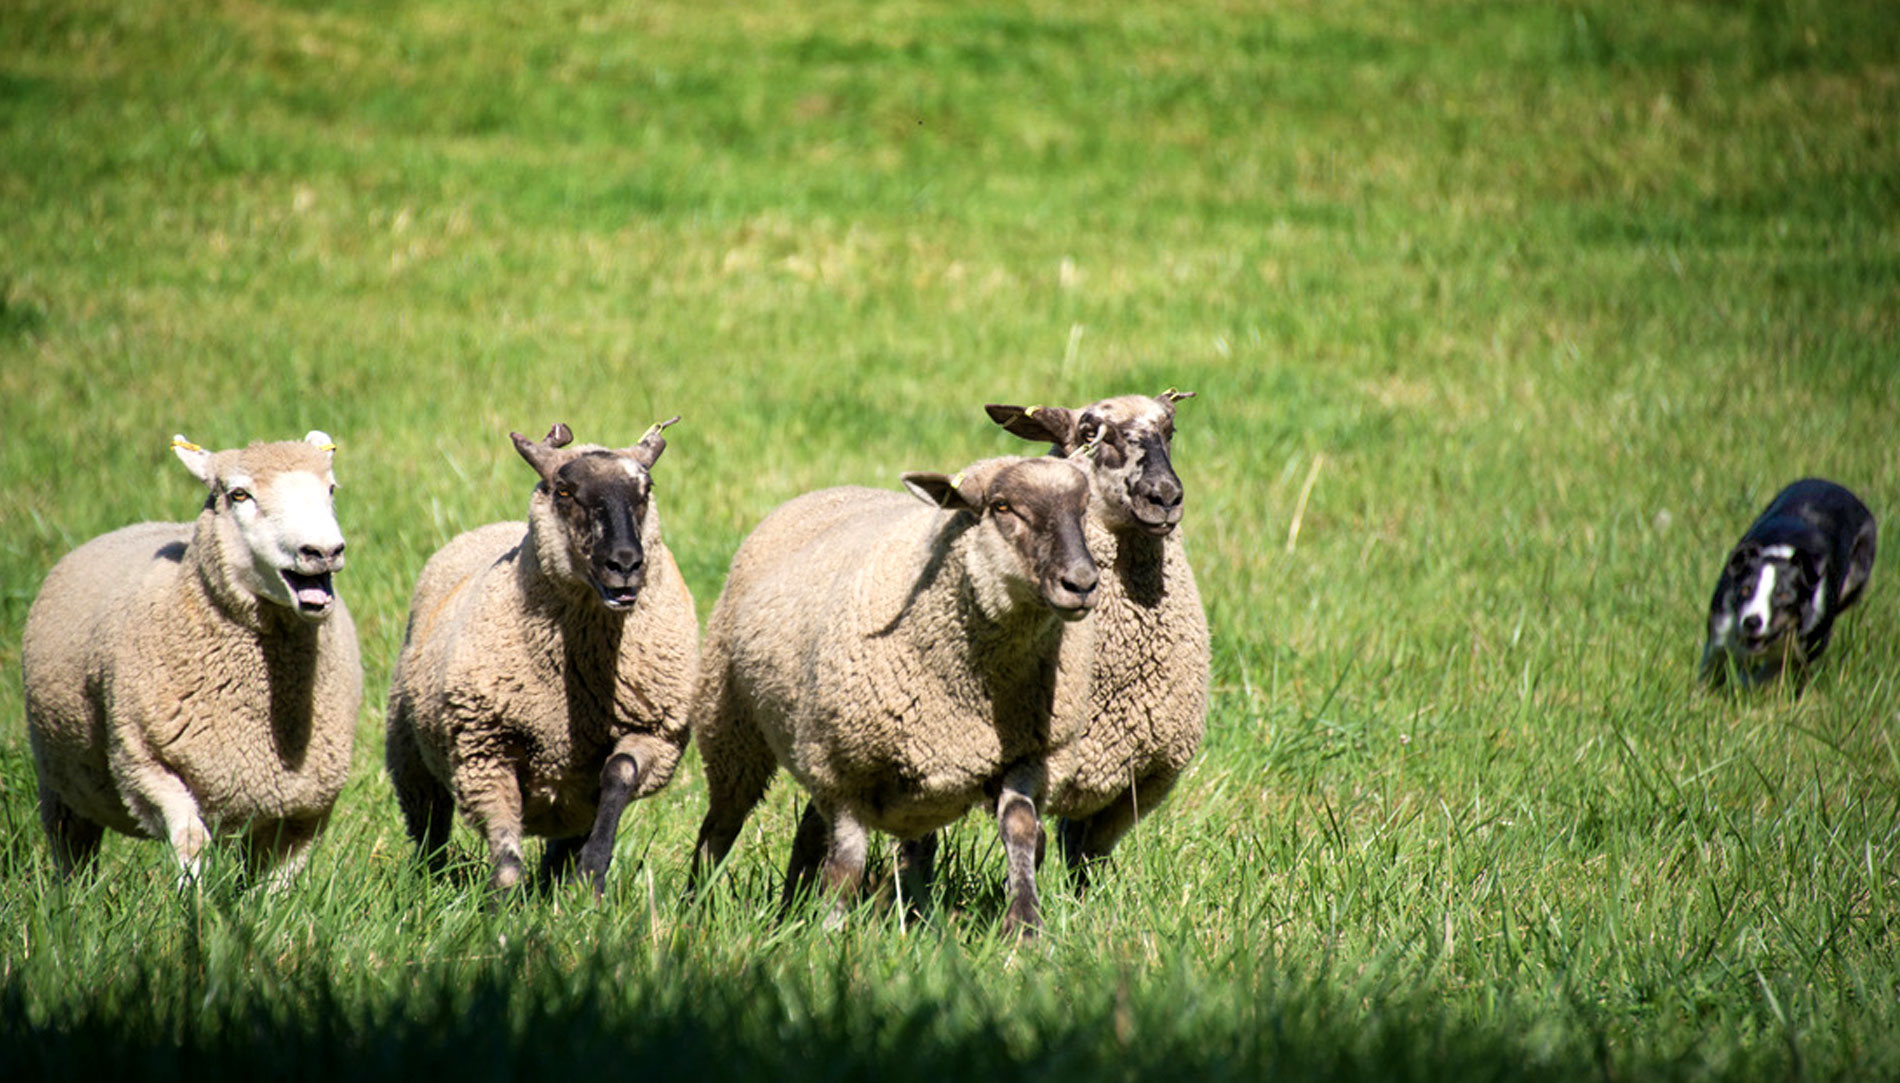 A sheepdog herds four sheep in a pasture on Vashon Island during the Vashon Sheepdog Classic competition